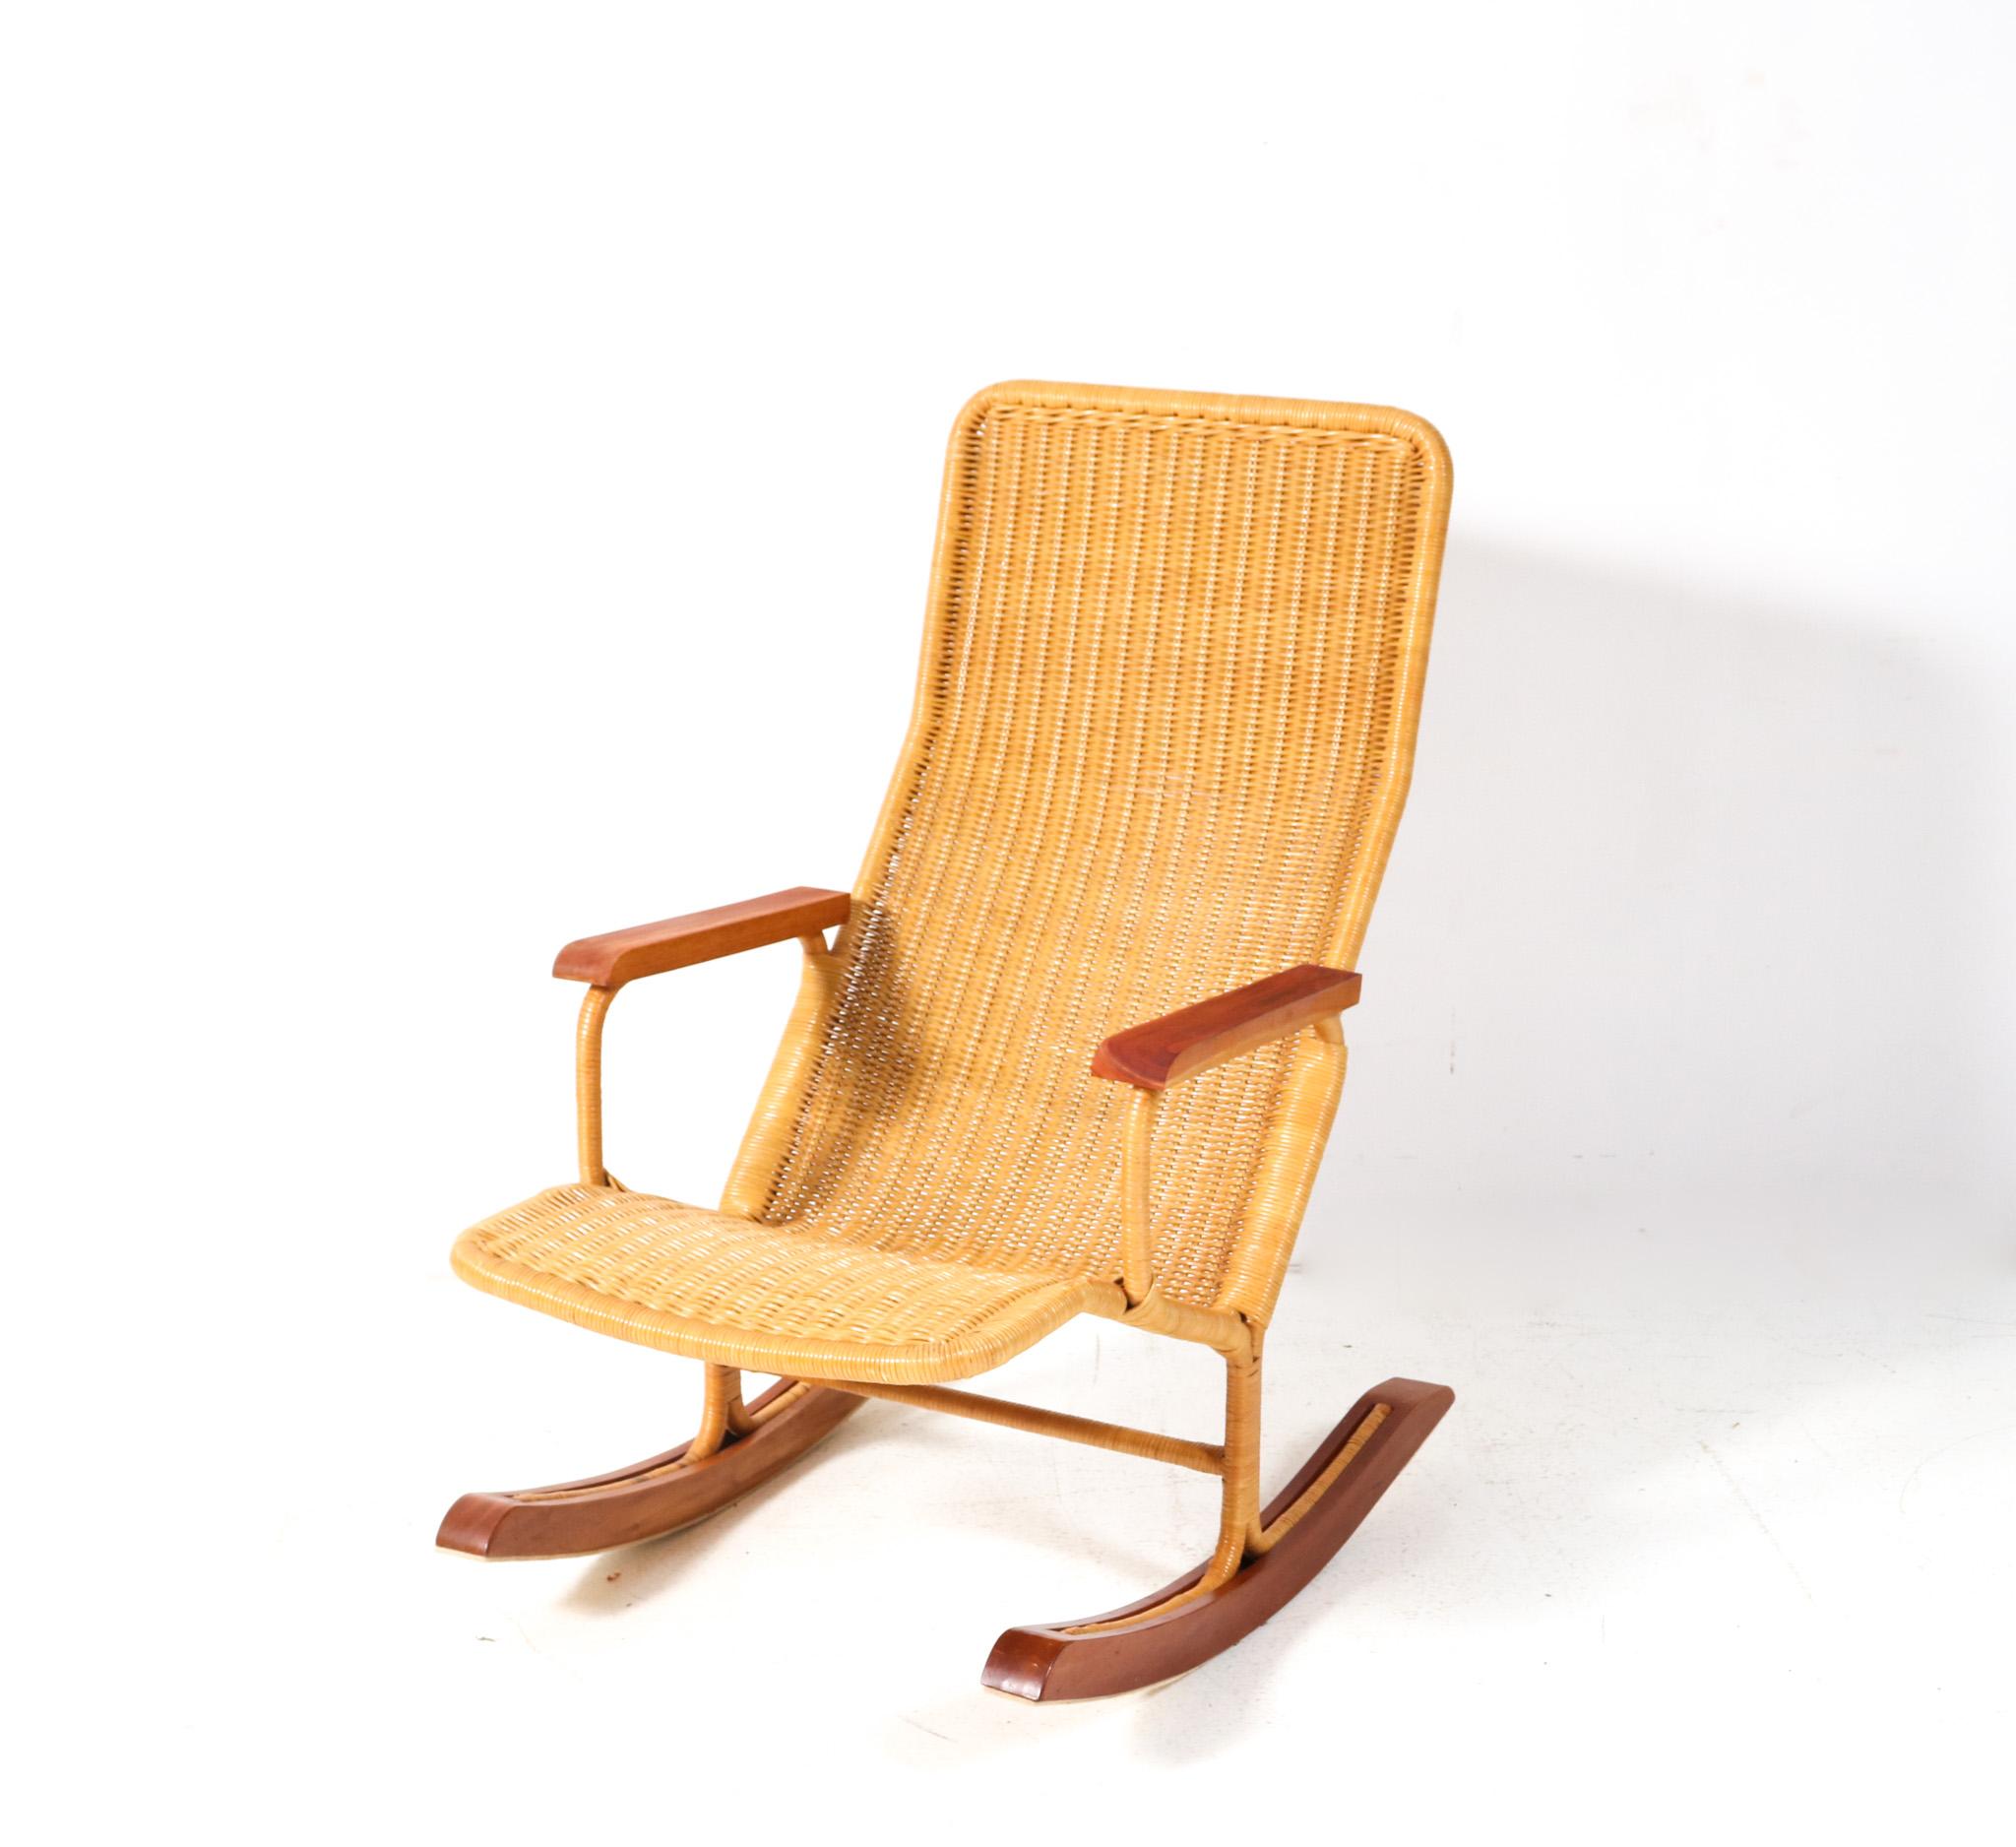 Magnificent and ultra rare Mid-Century Modern rocking chair.
Design by Dirk van Sliedregt for Gebroeders Jonkers Noordwolde.
Striking Dutch design from the 1960s.
Original rattan frame with original solid teak armrests and solid teak feet.
This